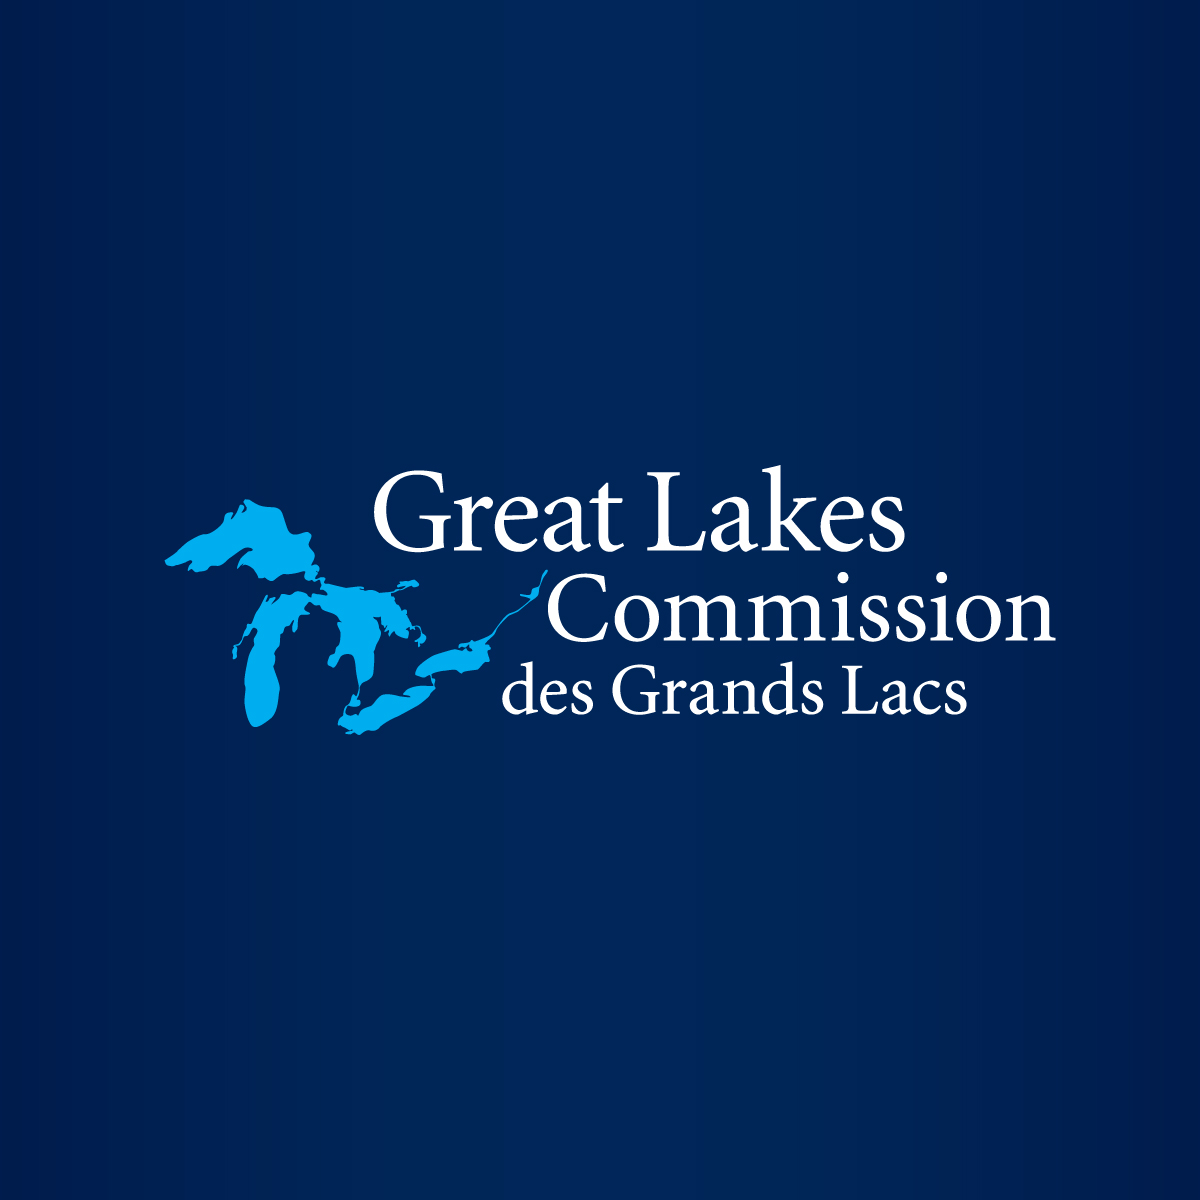 EDITORIAL: Great Lakes fresh water key to expanded economic prosperity for region